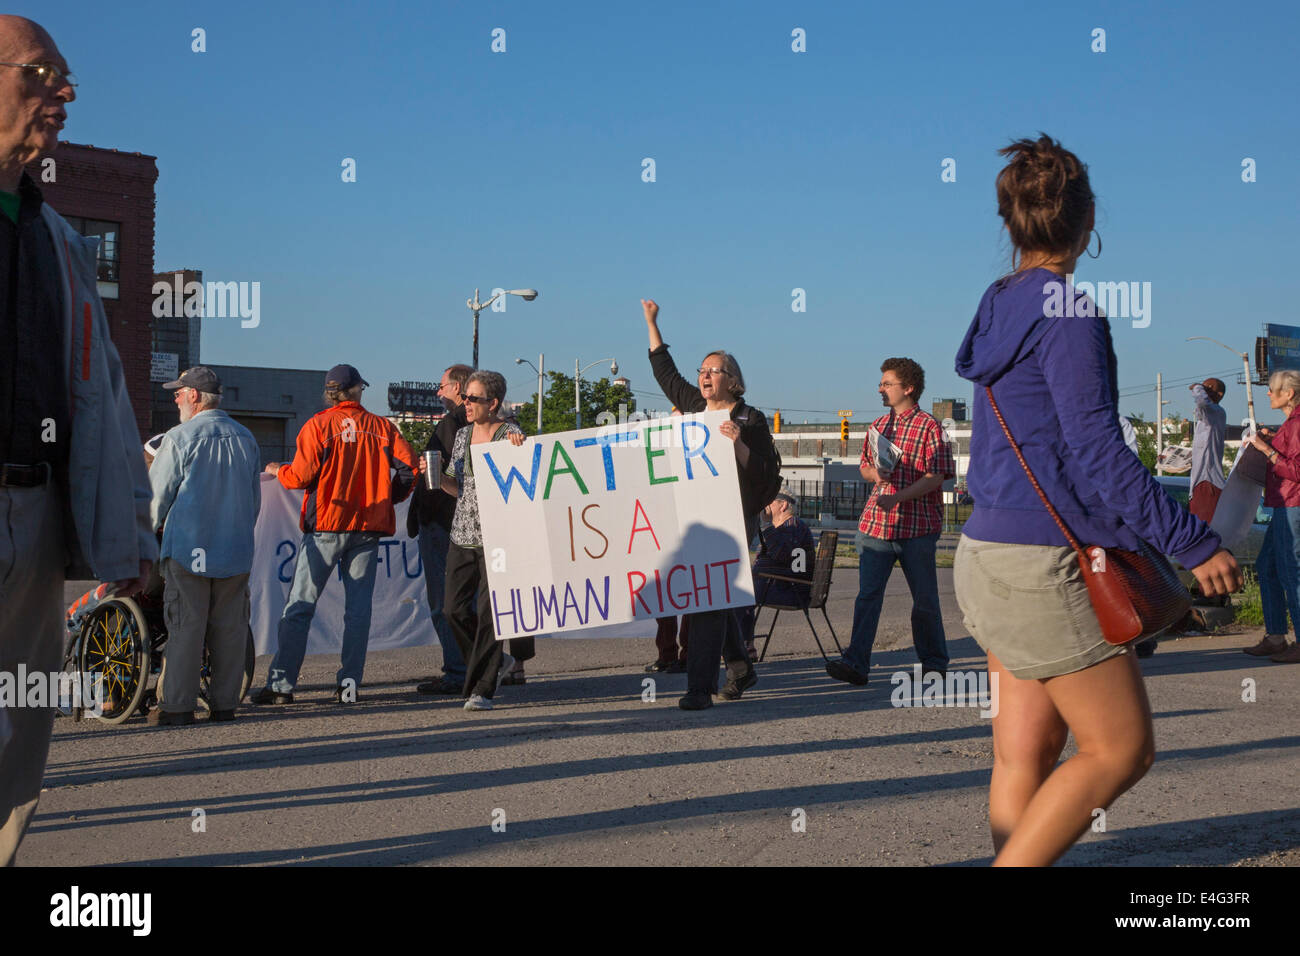 Detroit, Michigan, USA. Religious and community activists block the entrance to Homrich, a contractor hired to shut off water service to Detroit residents. As it tries to recover from bankruptcy, the city is shutting off water to tens of thousands of residents living in poverty who are behind on their bills. Credit:  Jim West/Alamy Live News Stock Photo